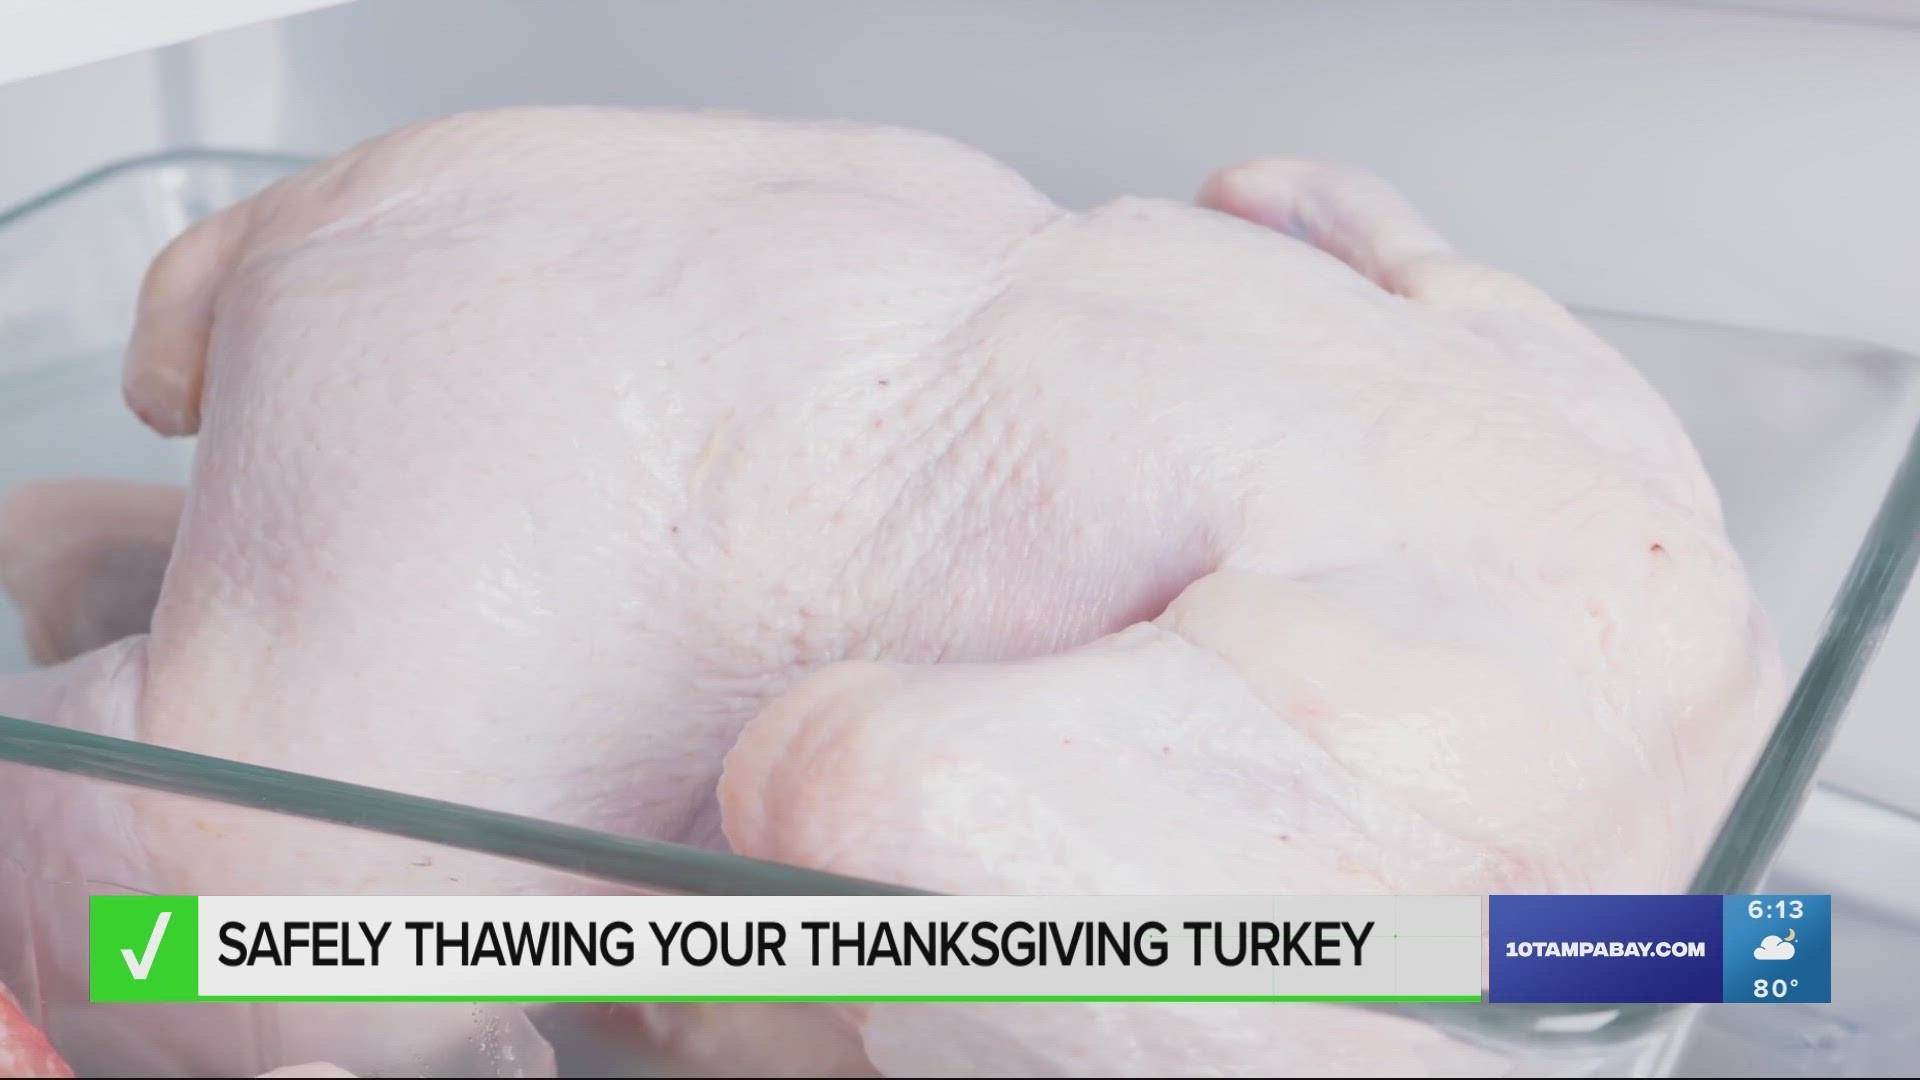 How long should you thaw your Thanksgiving turkey in the fridge or water? Is it safe to defrost it in the microwave or at room temperature? Here's what we found.